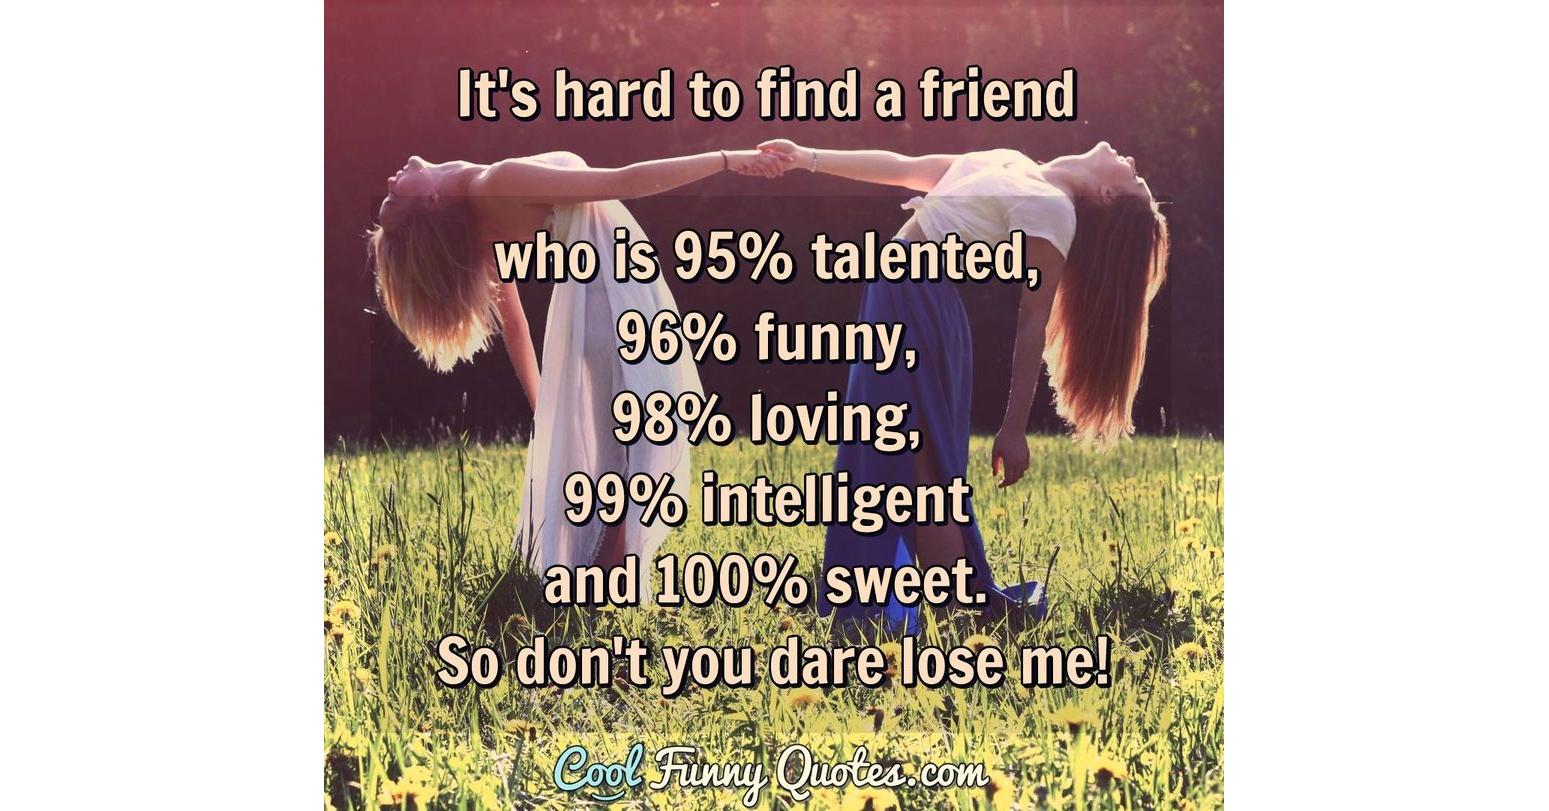 It's hard to find a friend who is 95% talented, 96% funny, 98% loving